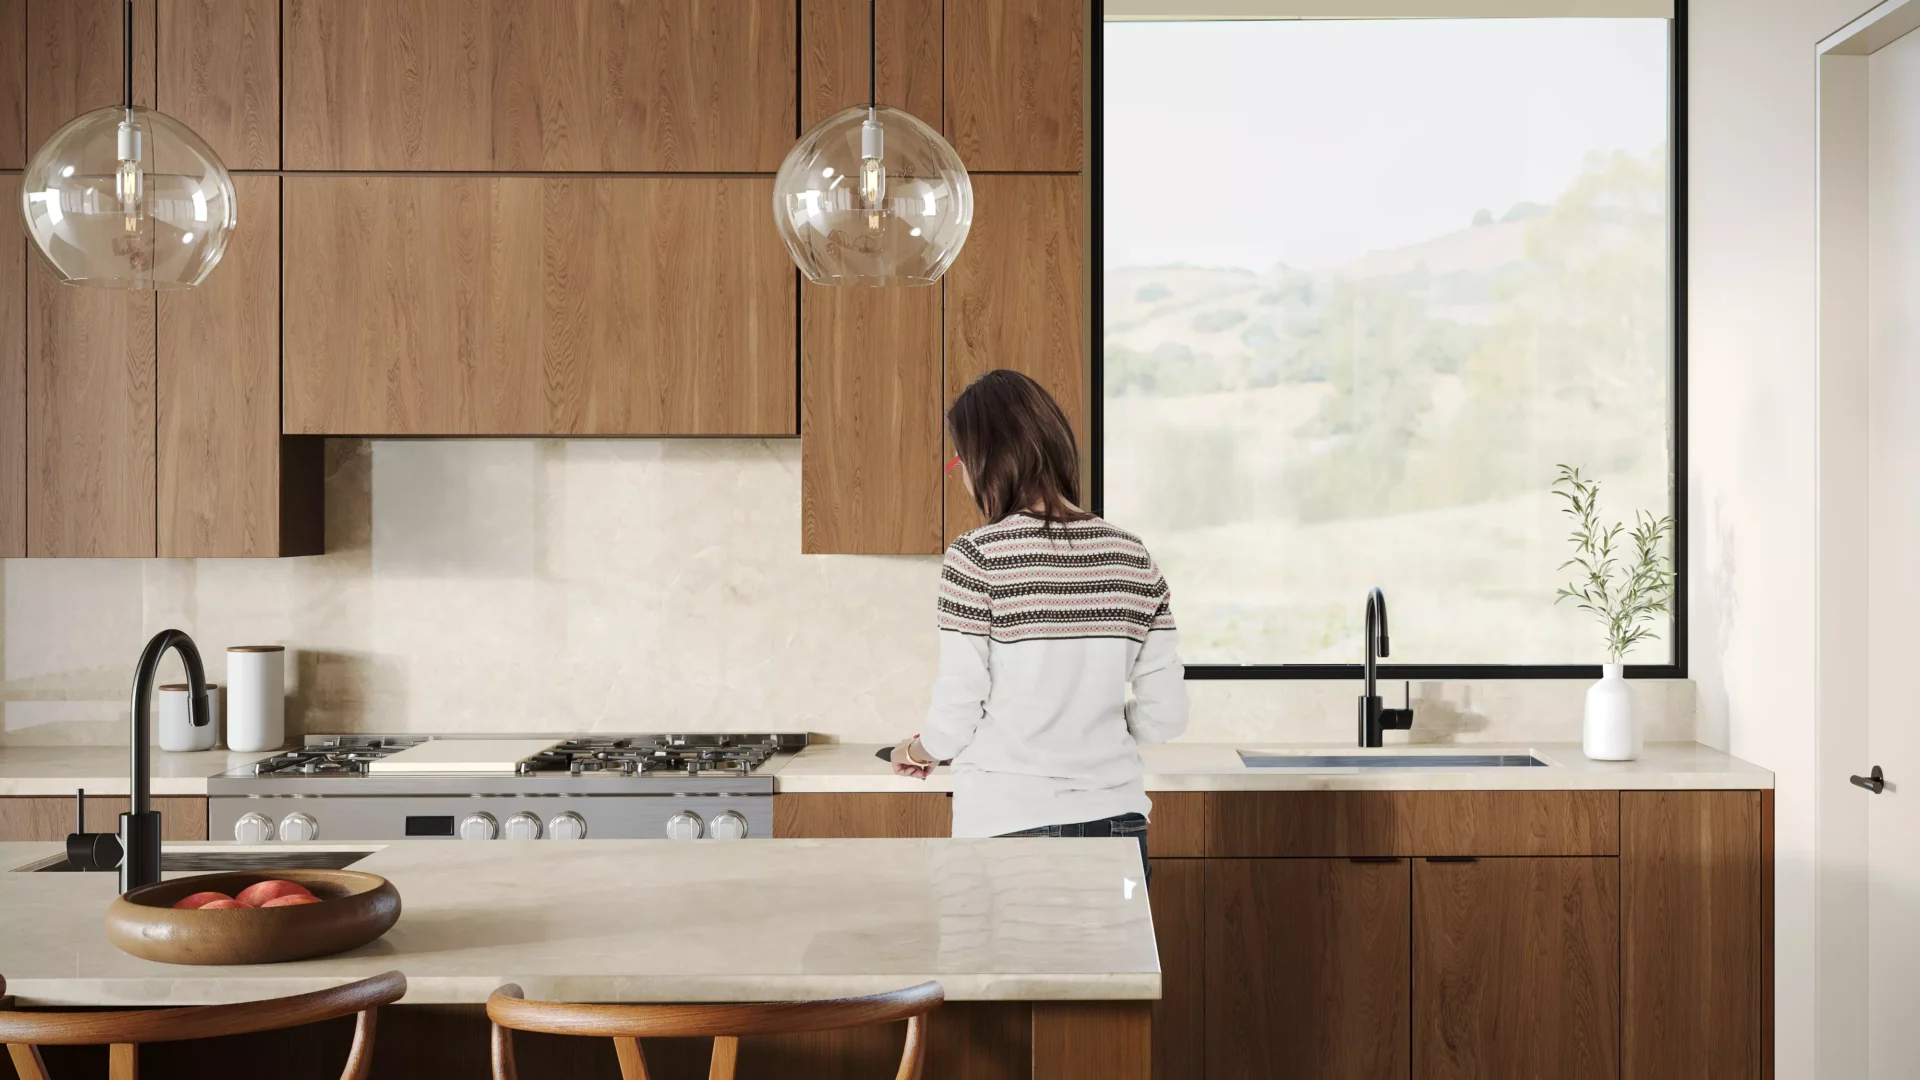 photorealistic 3d render: kitchen interior design with a woman